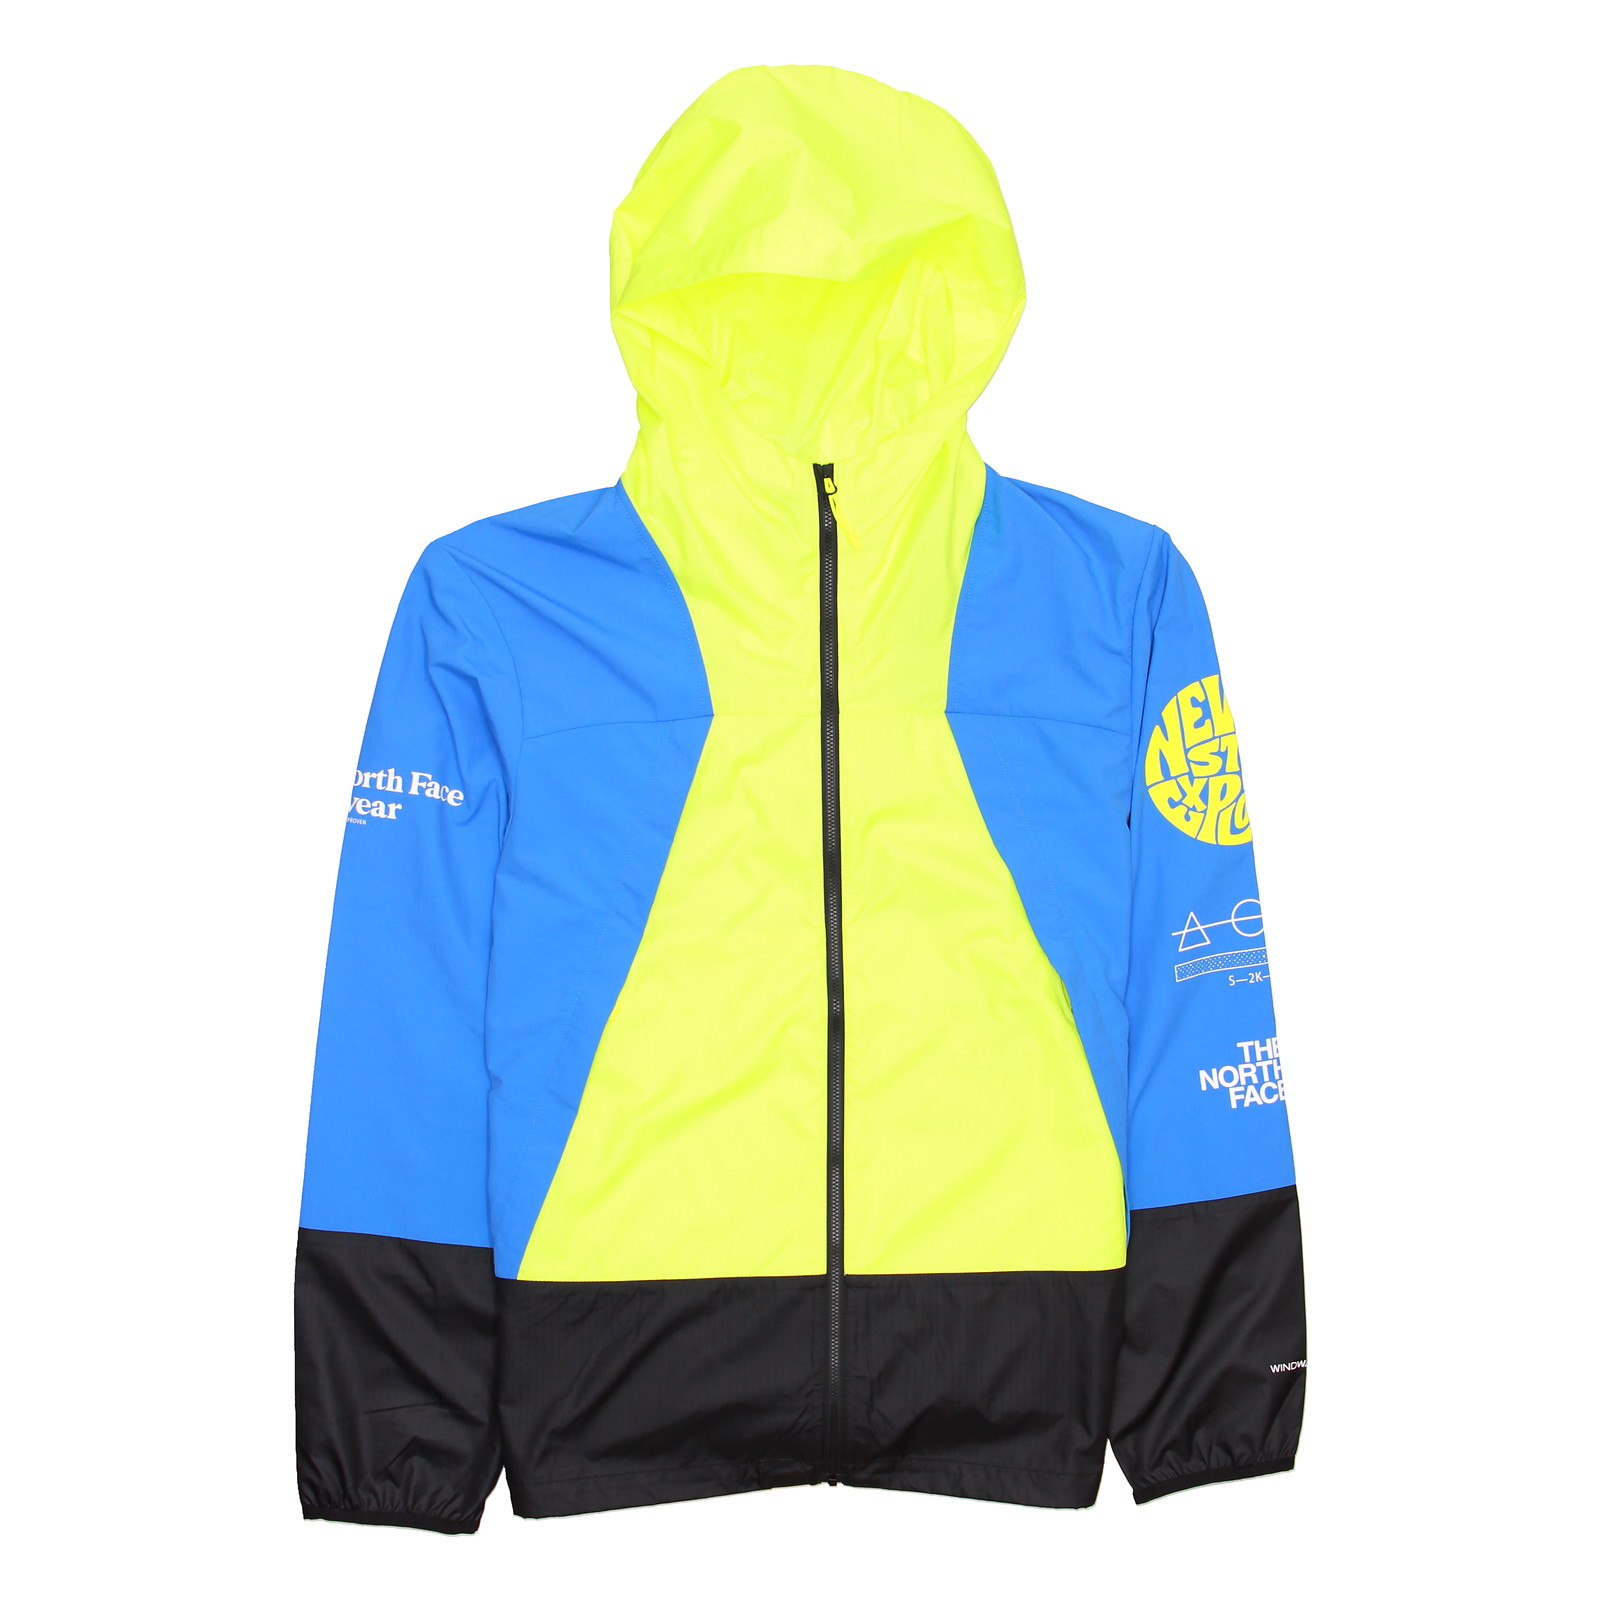 The North Face Trailwear Wind Whistle Men's WindWall Color Block Jacket $140